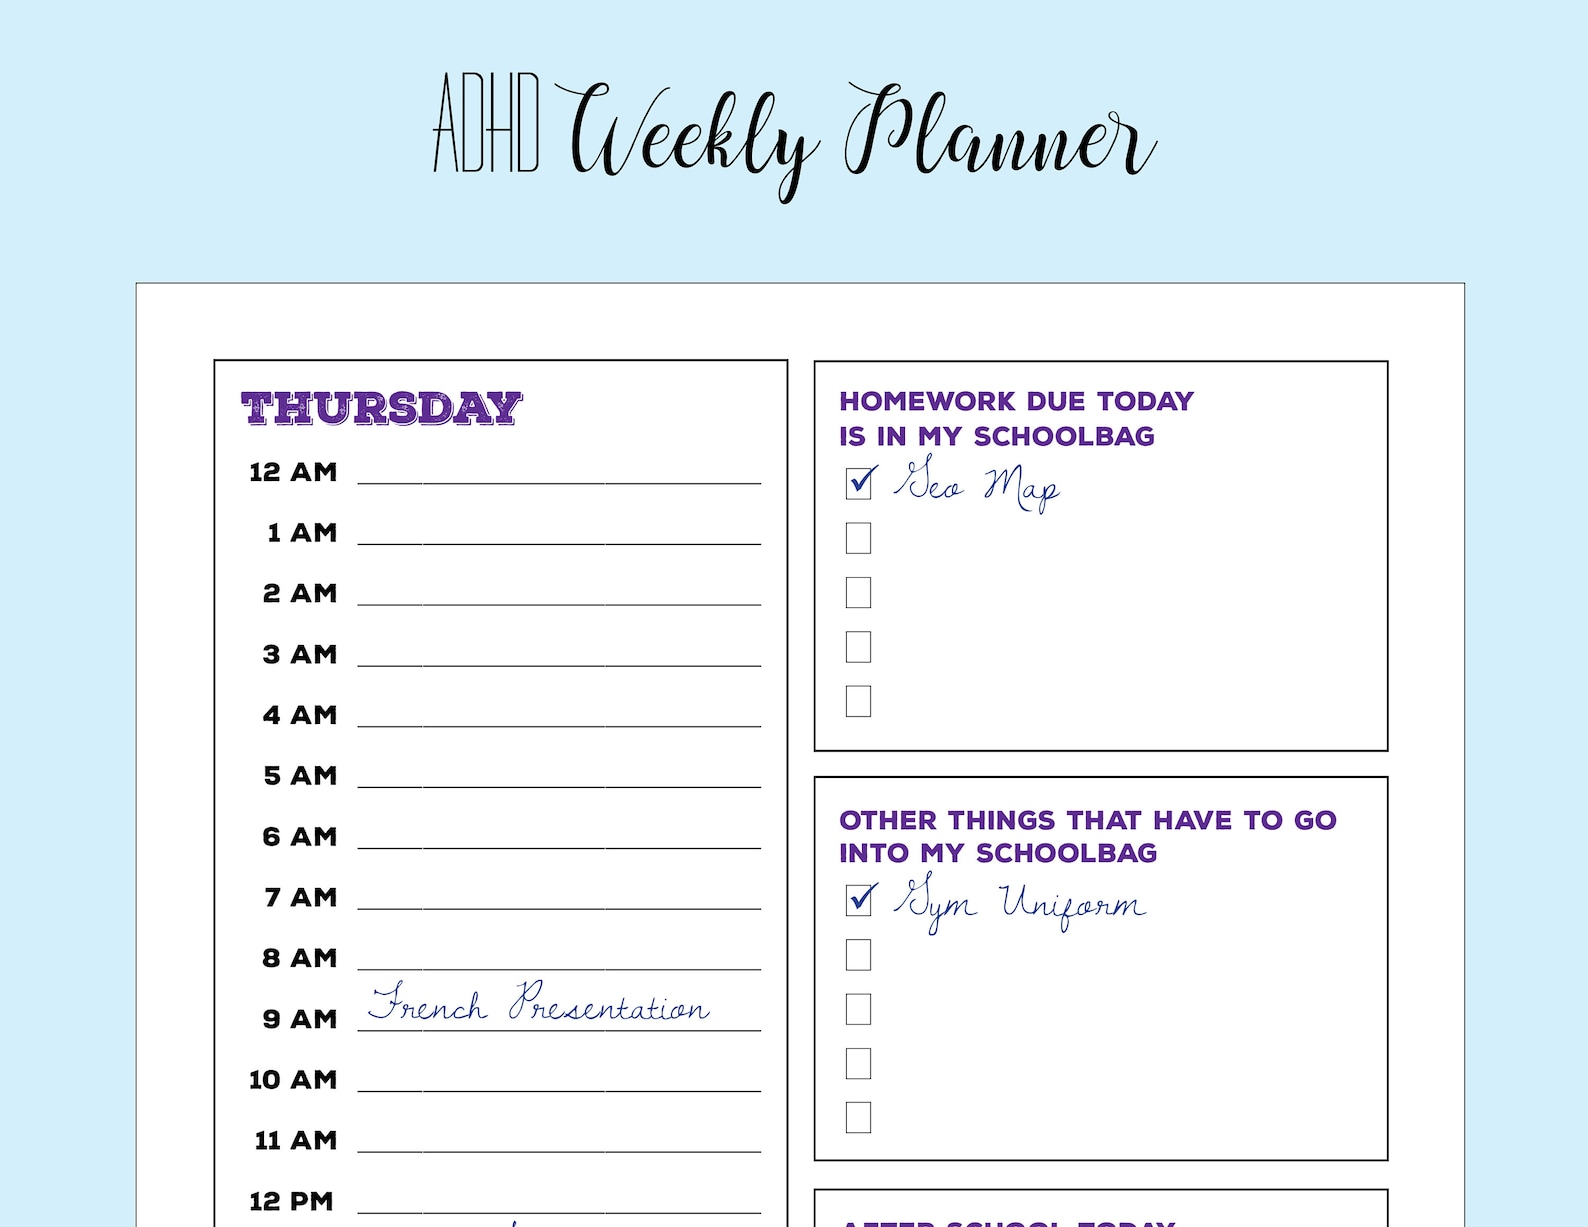 Adhd Weekly Planner Template Free